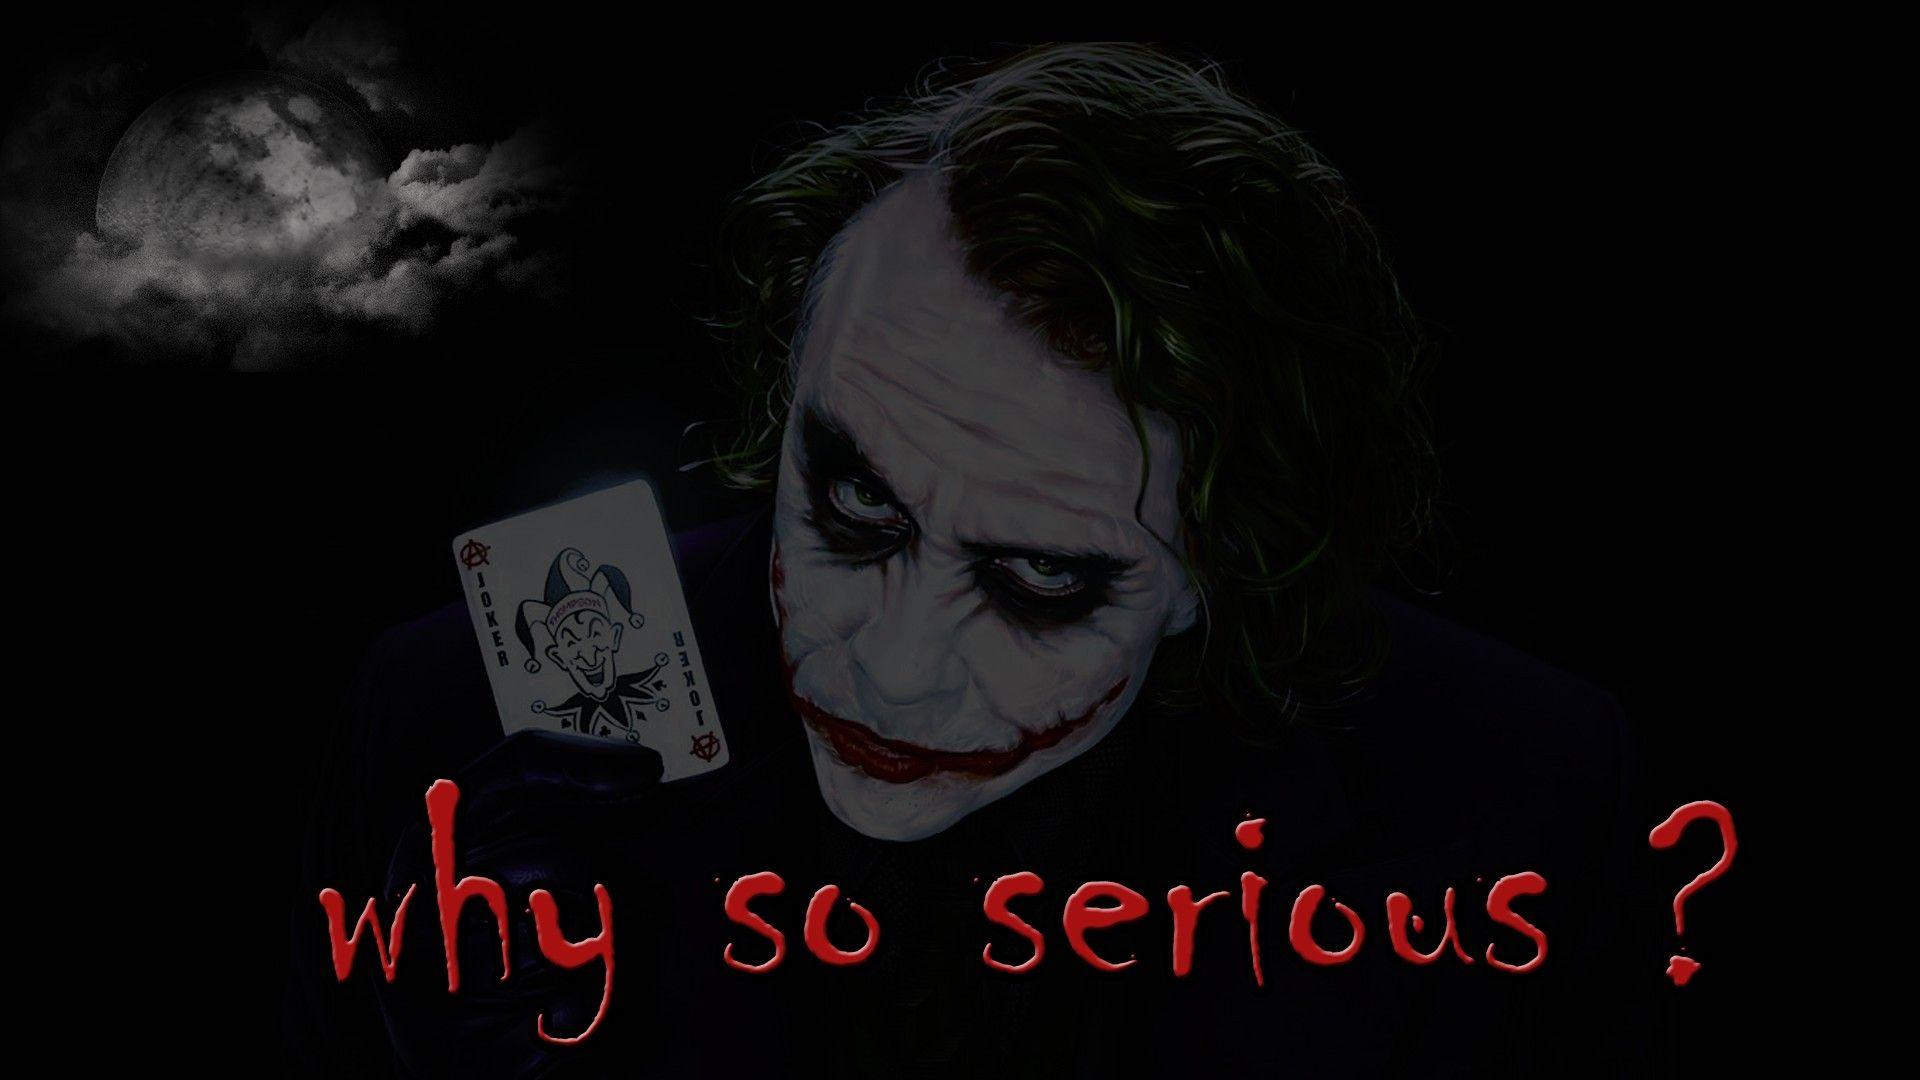 Joker Why So Serious Wallpaper 4k The Great Collection Of Joker Why So